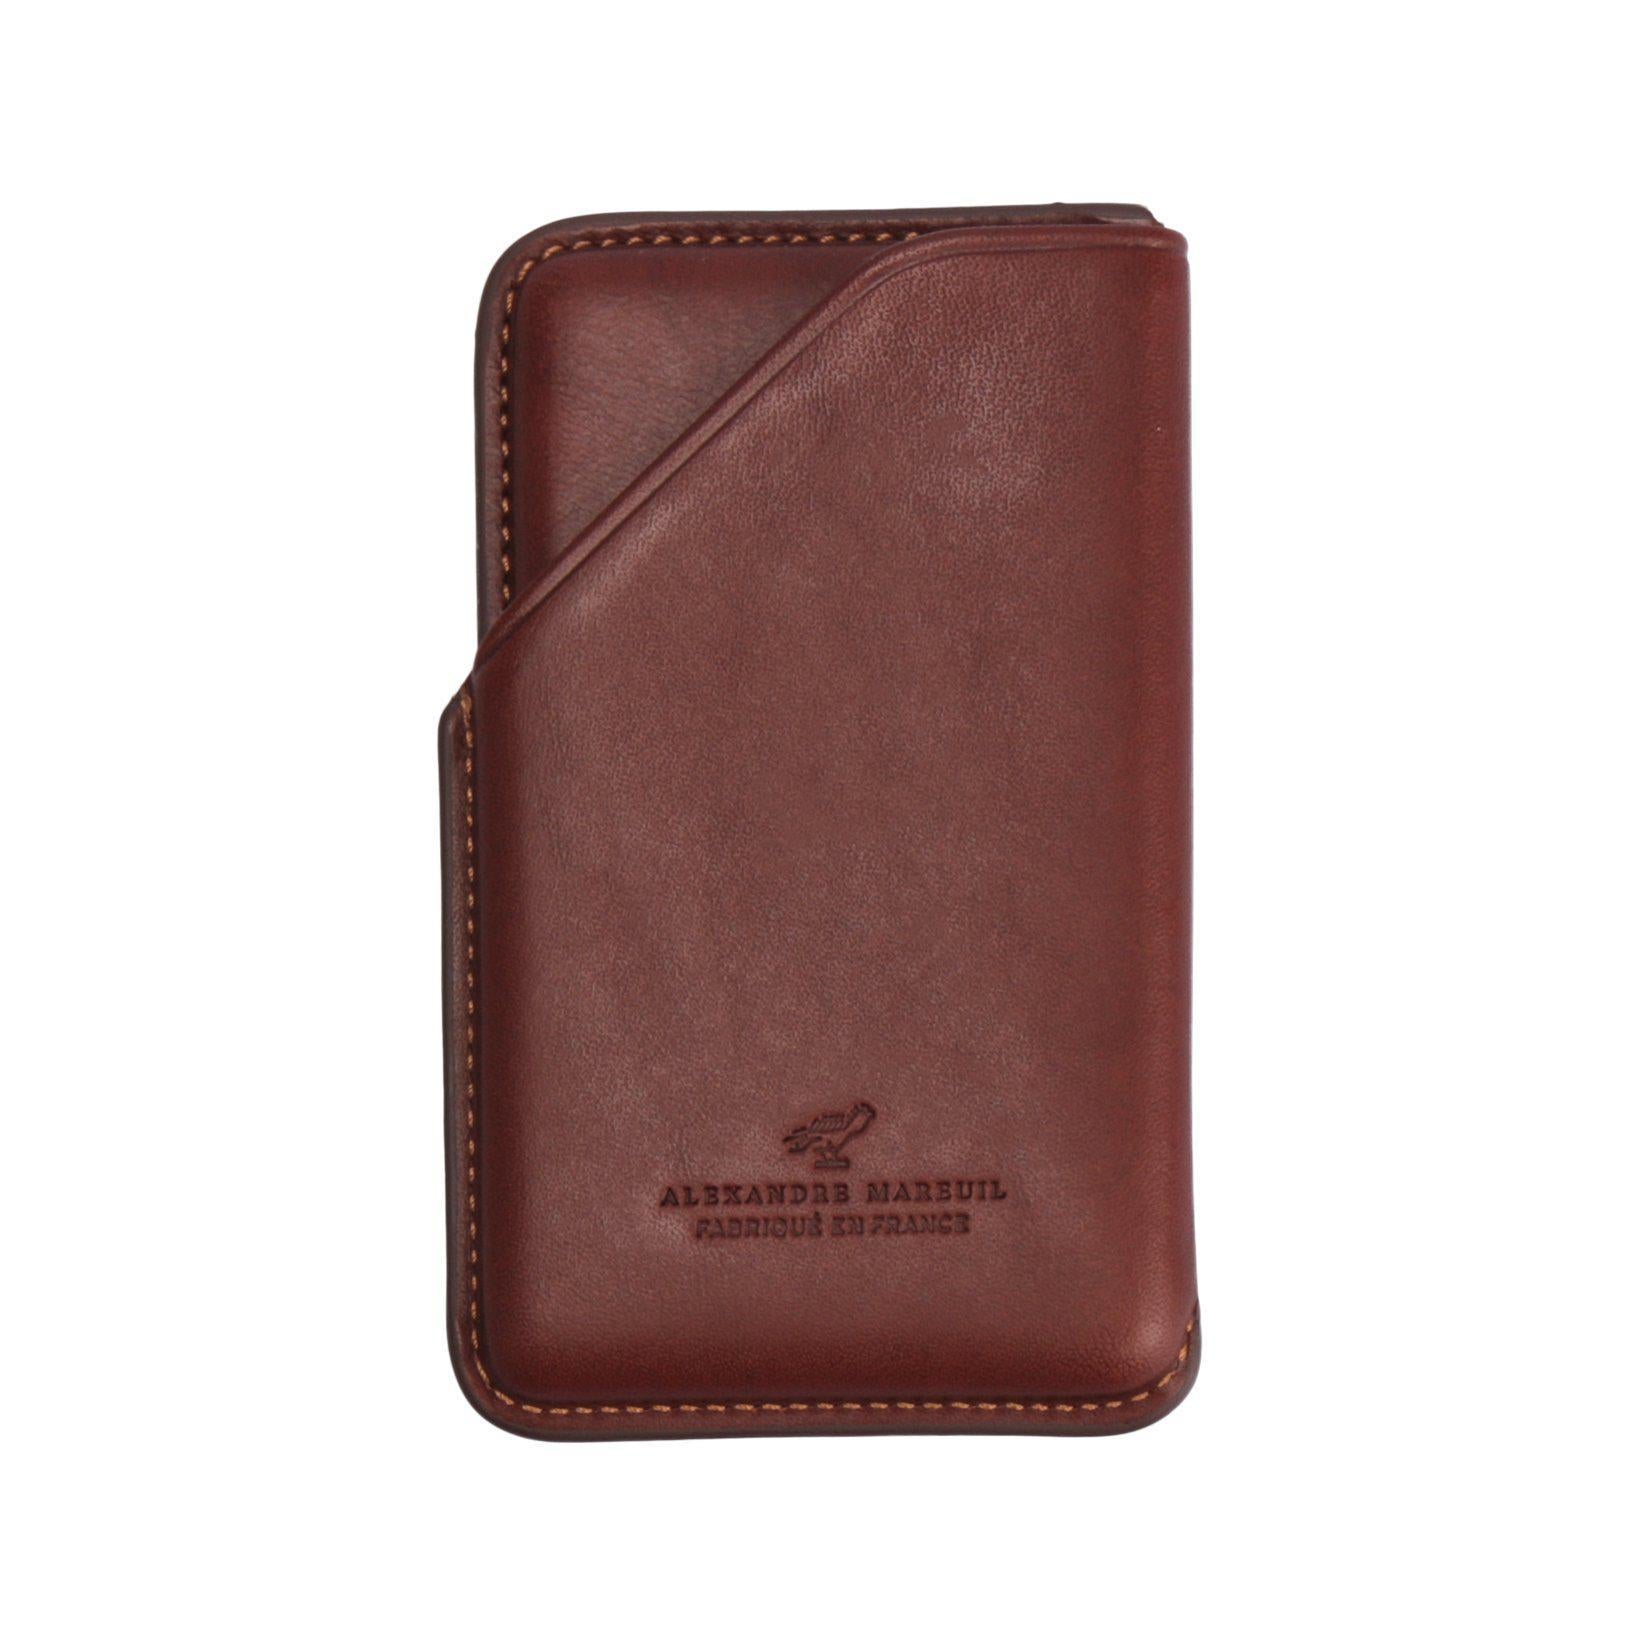 Leather Credit Card Case-Alexandre Mareuil-Conrad Hasselbach Shoes & Garment